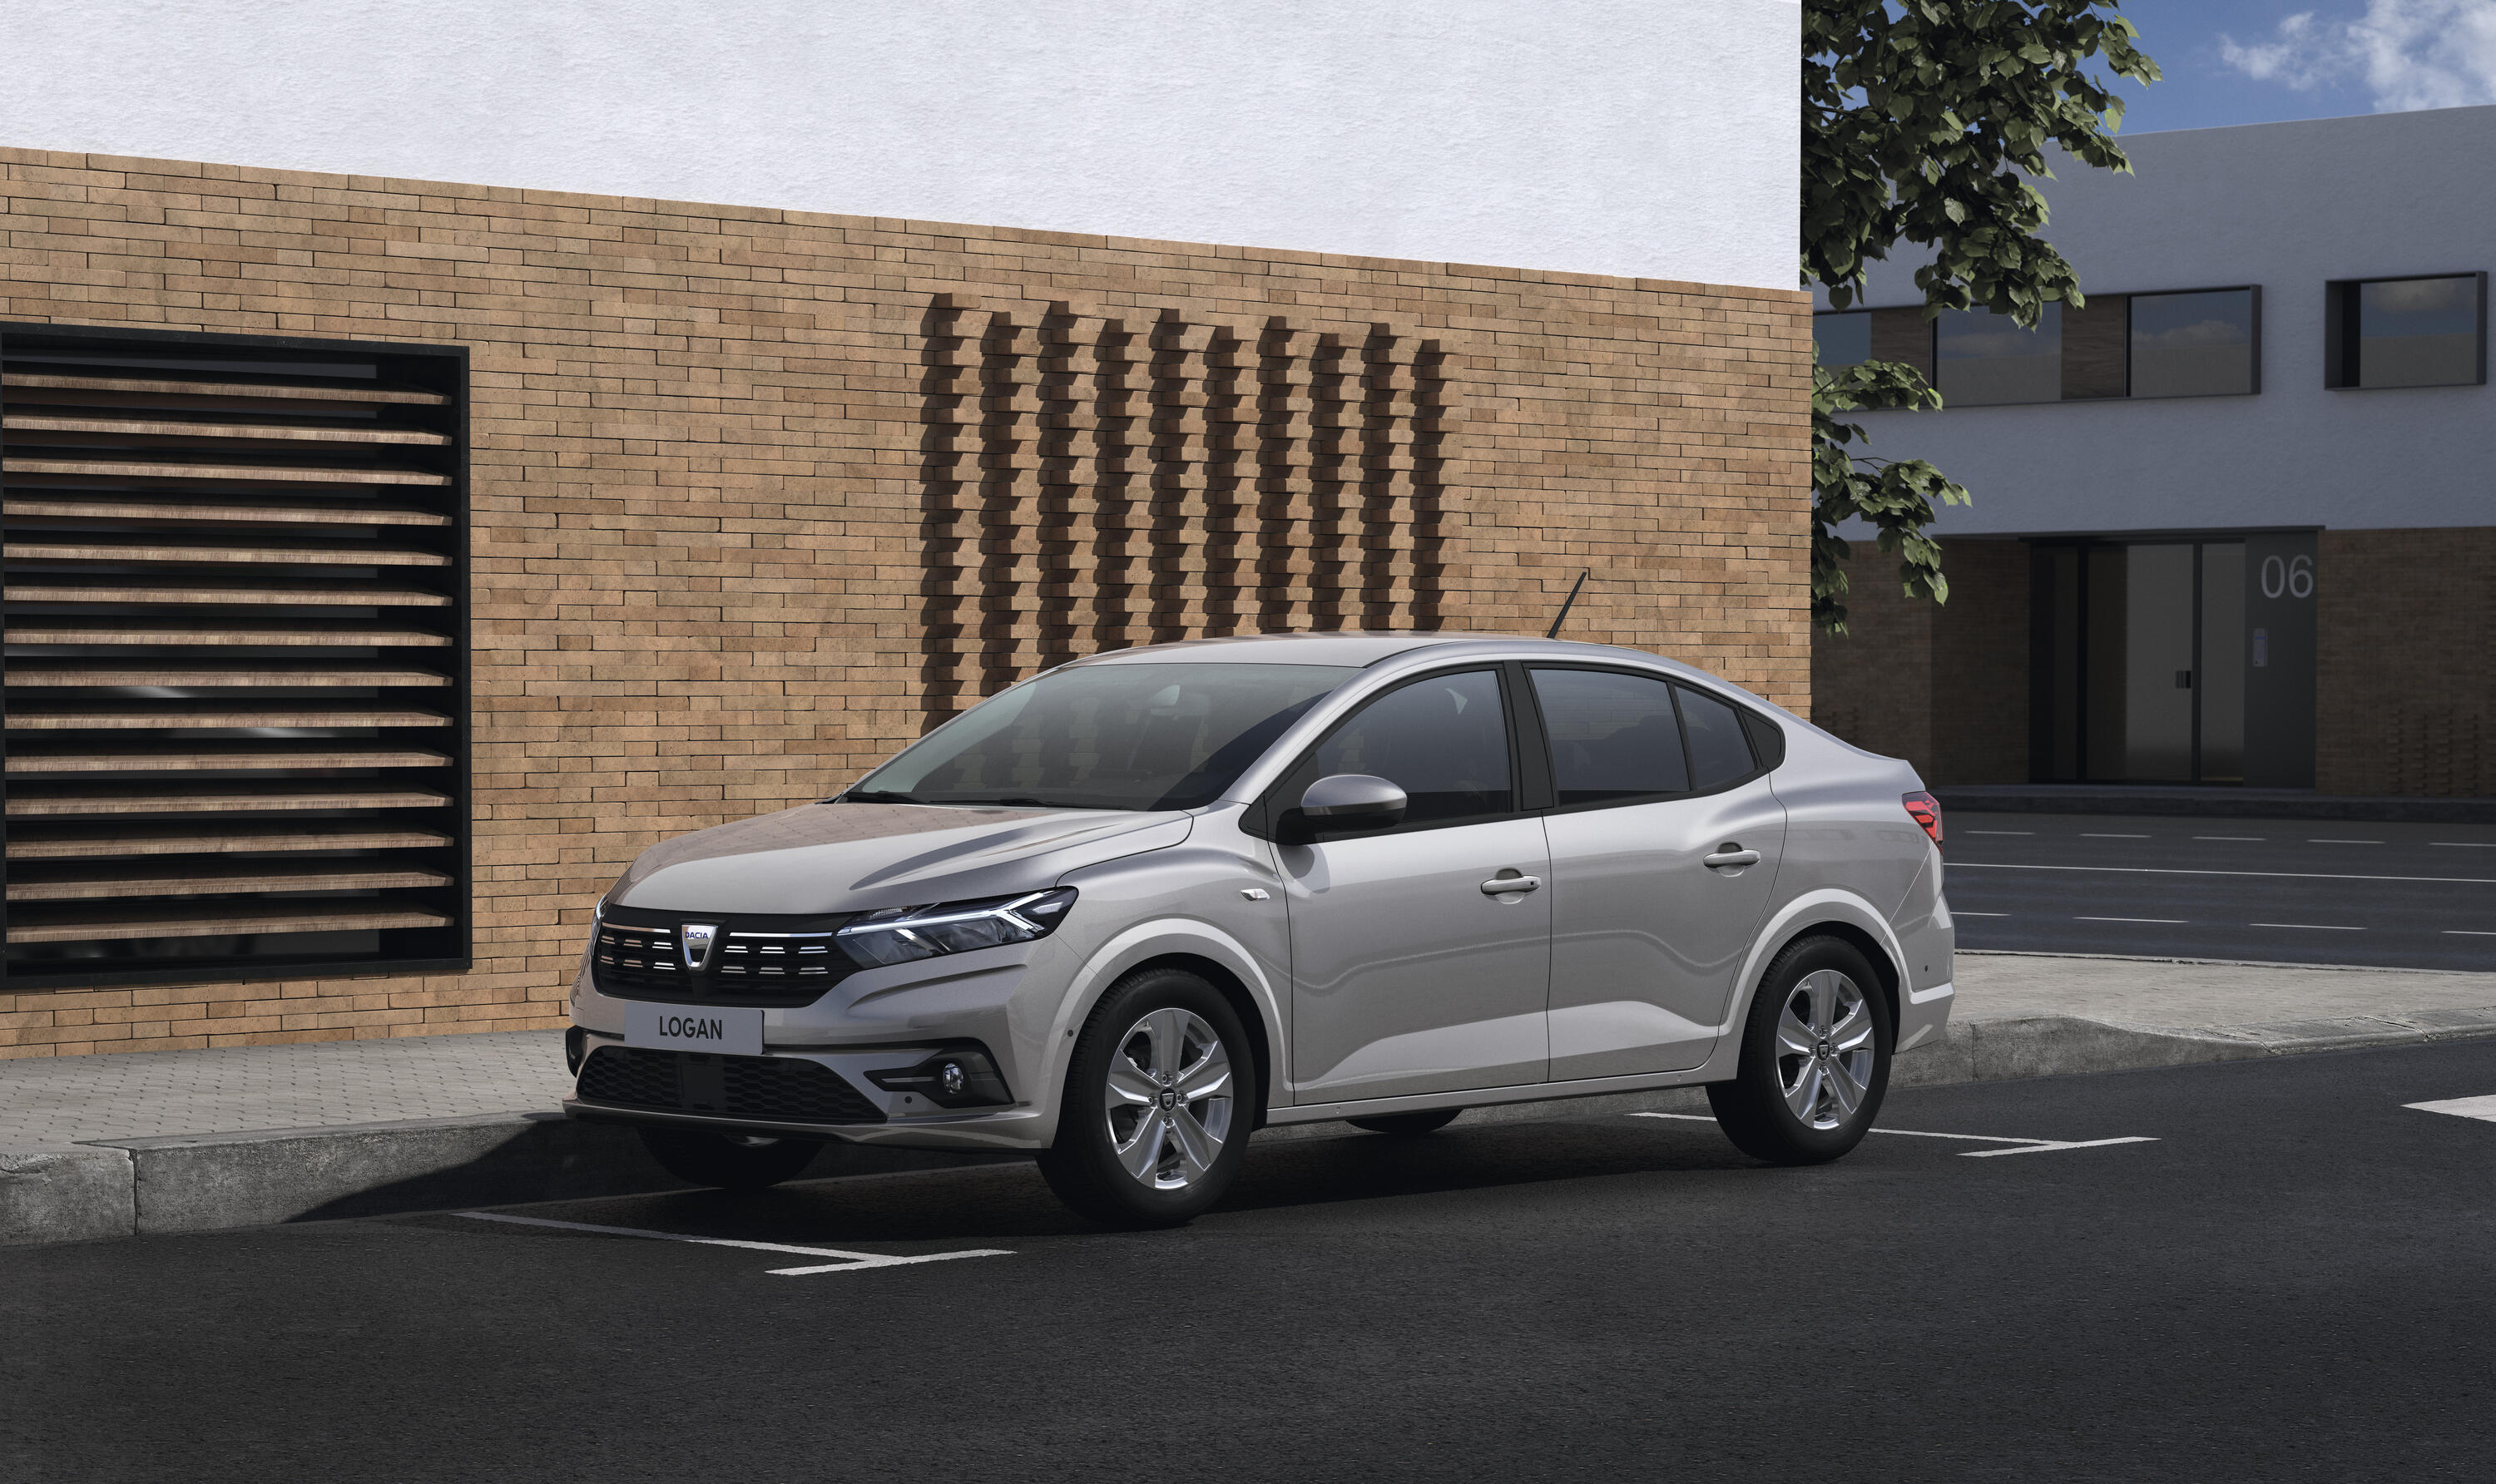 Dacia revives family subcompact model, unveils tempting price